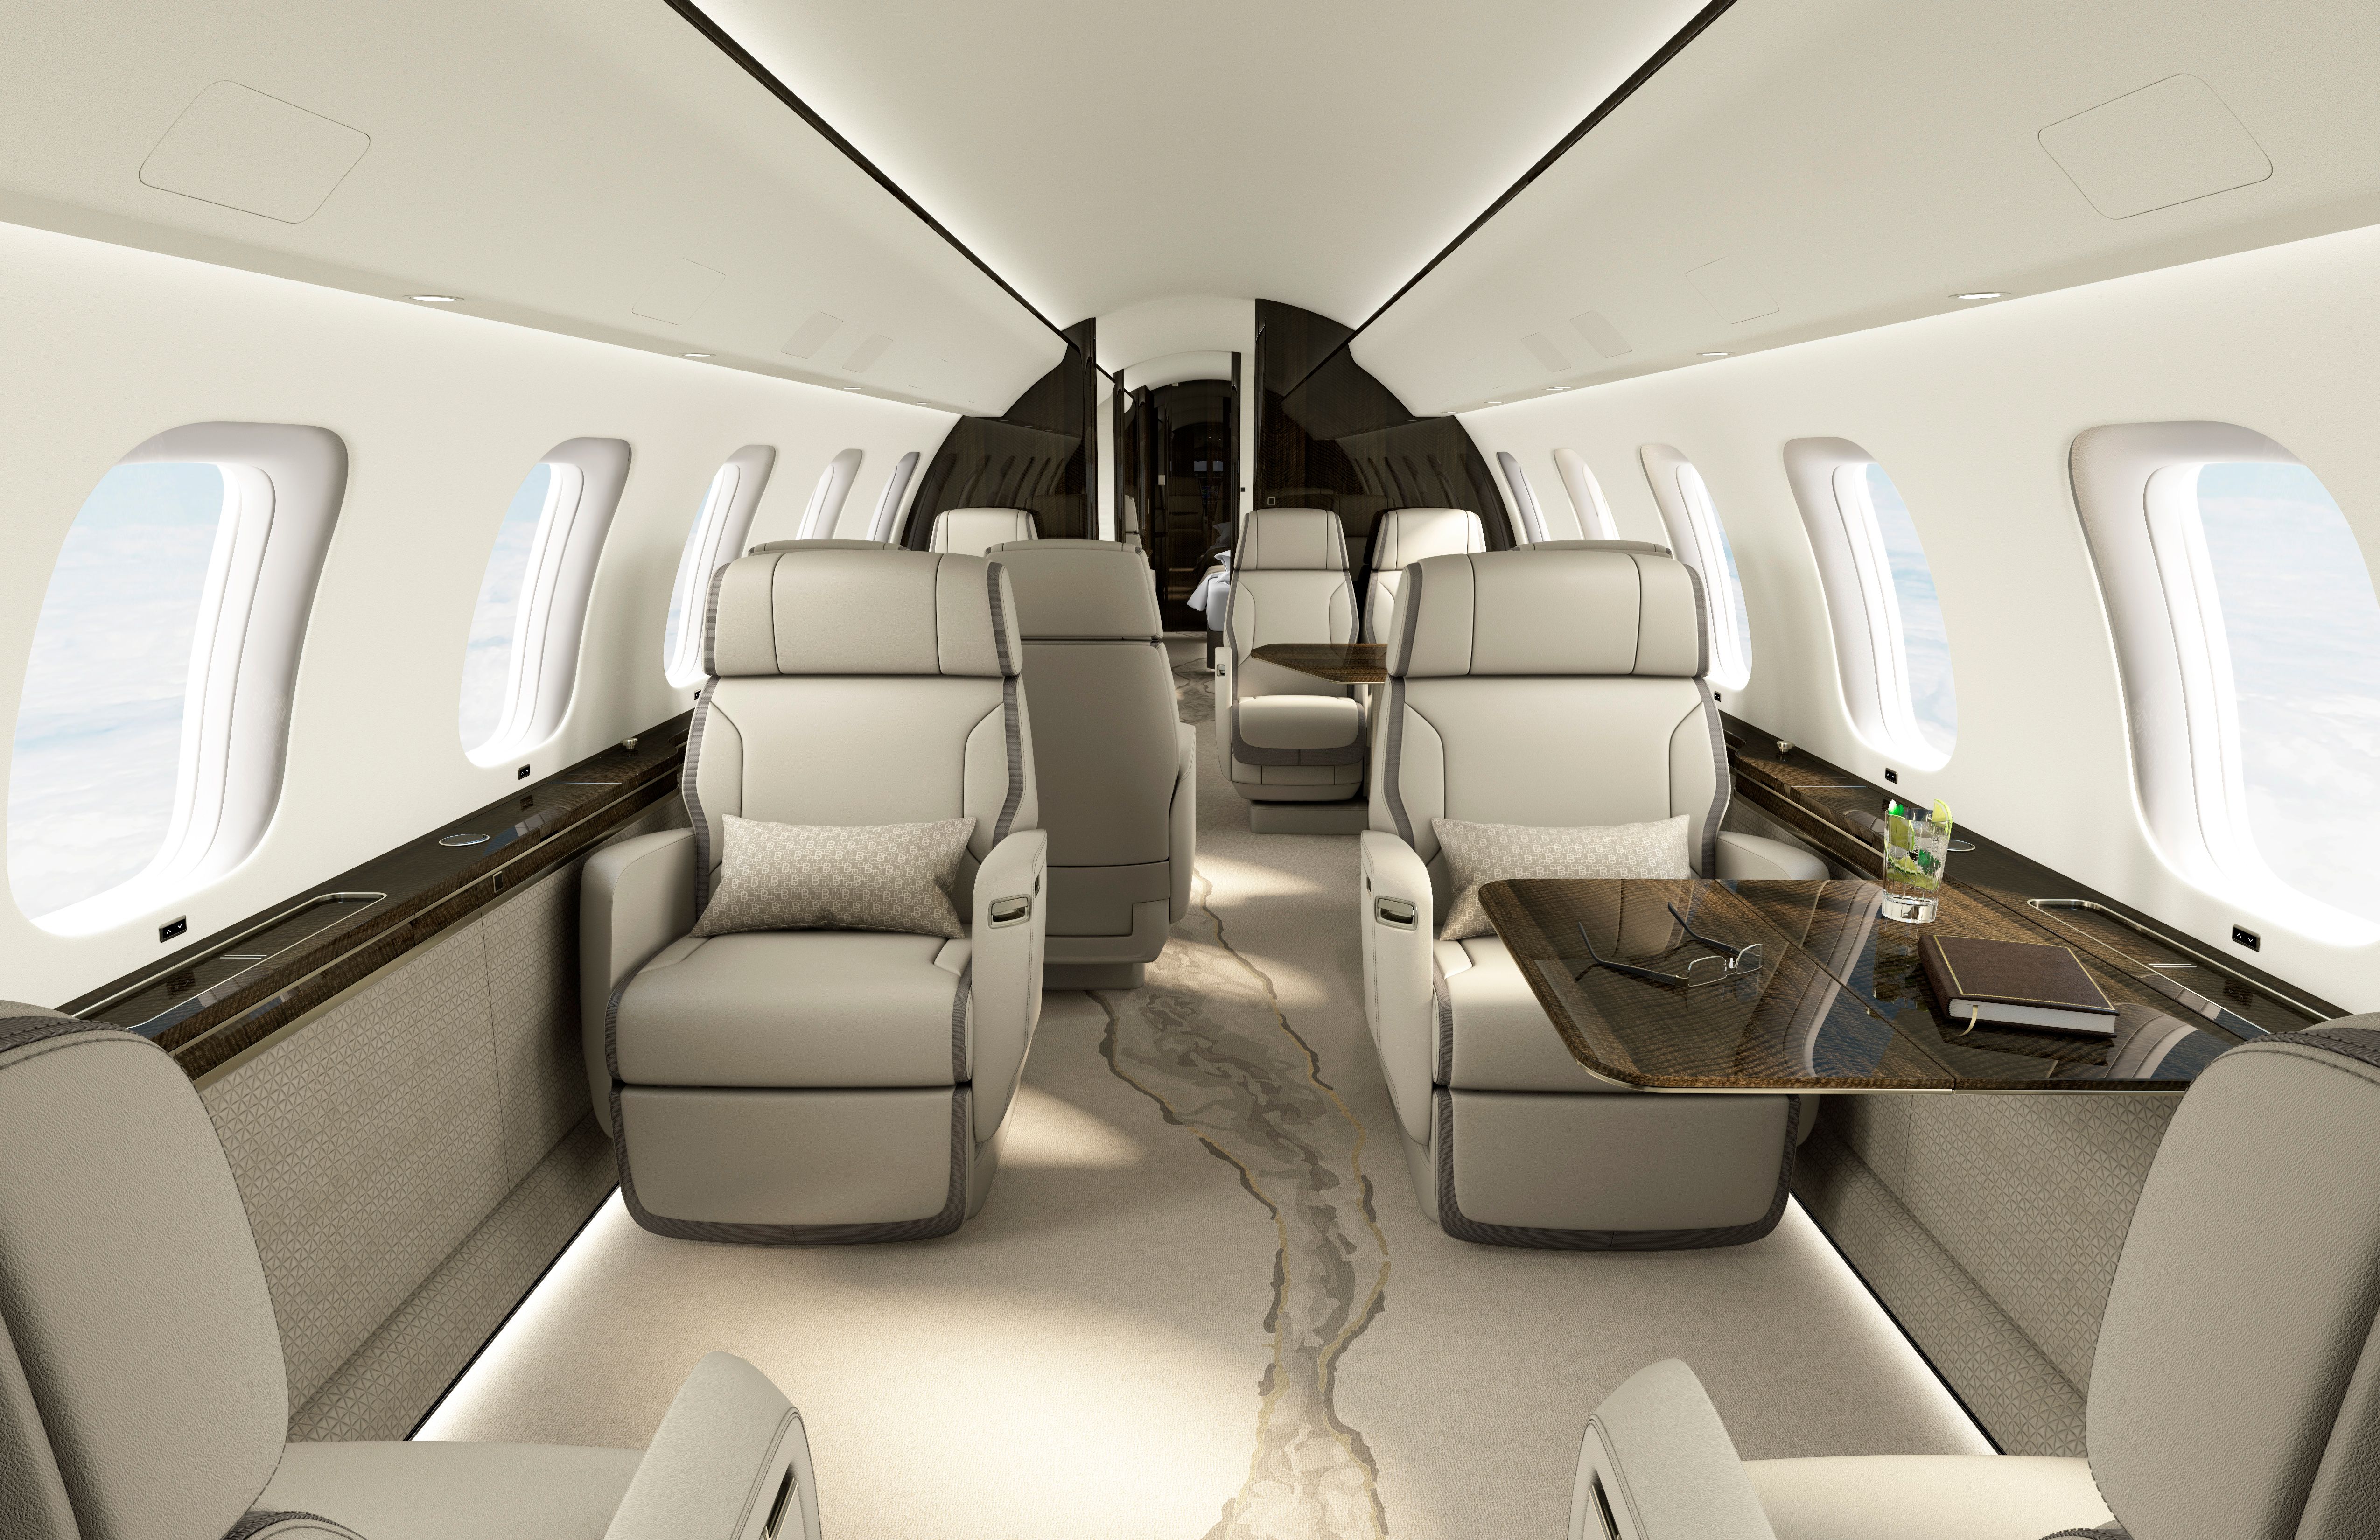 Inside the main cabin area of a Bombardier Global 8000.